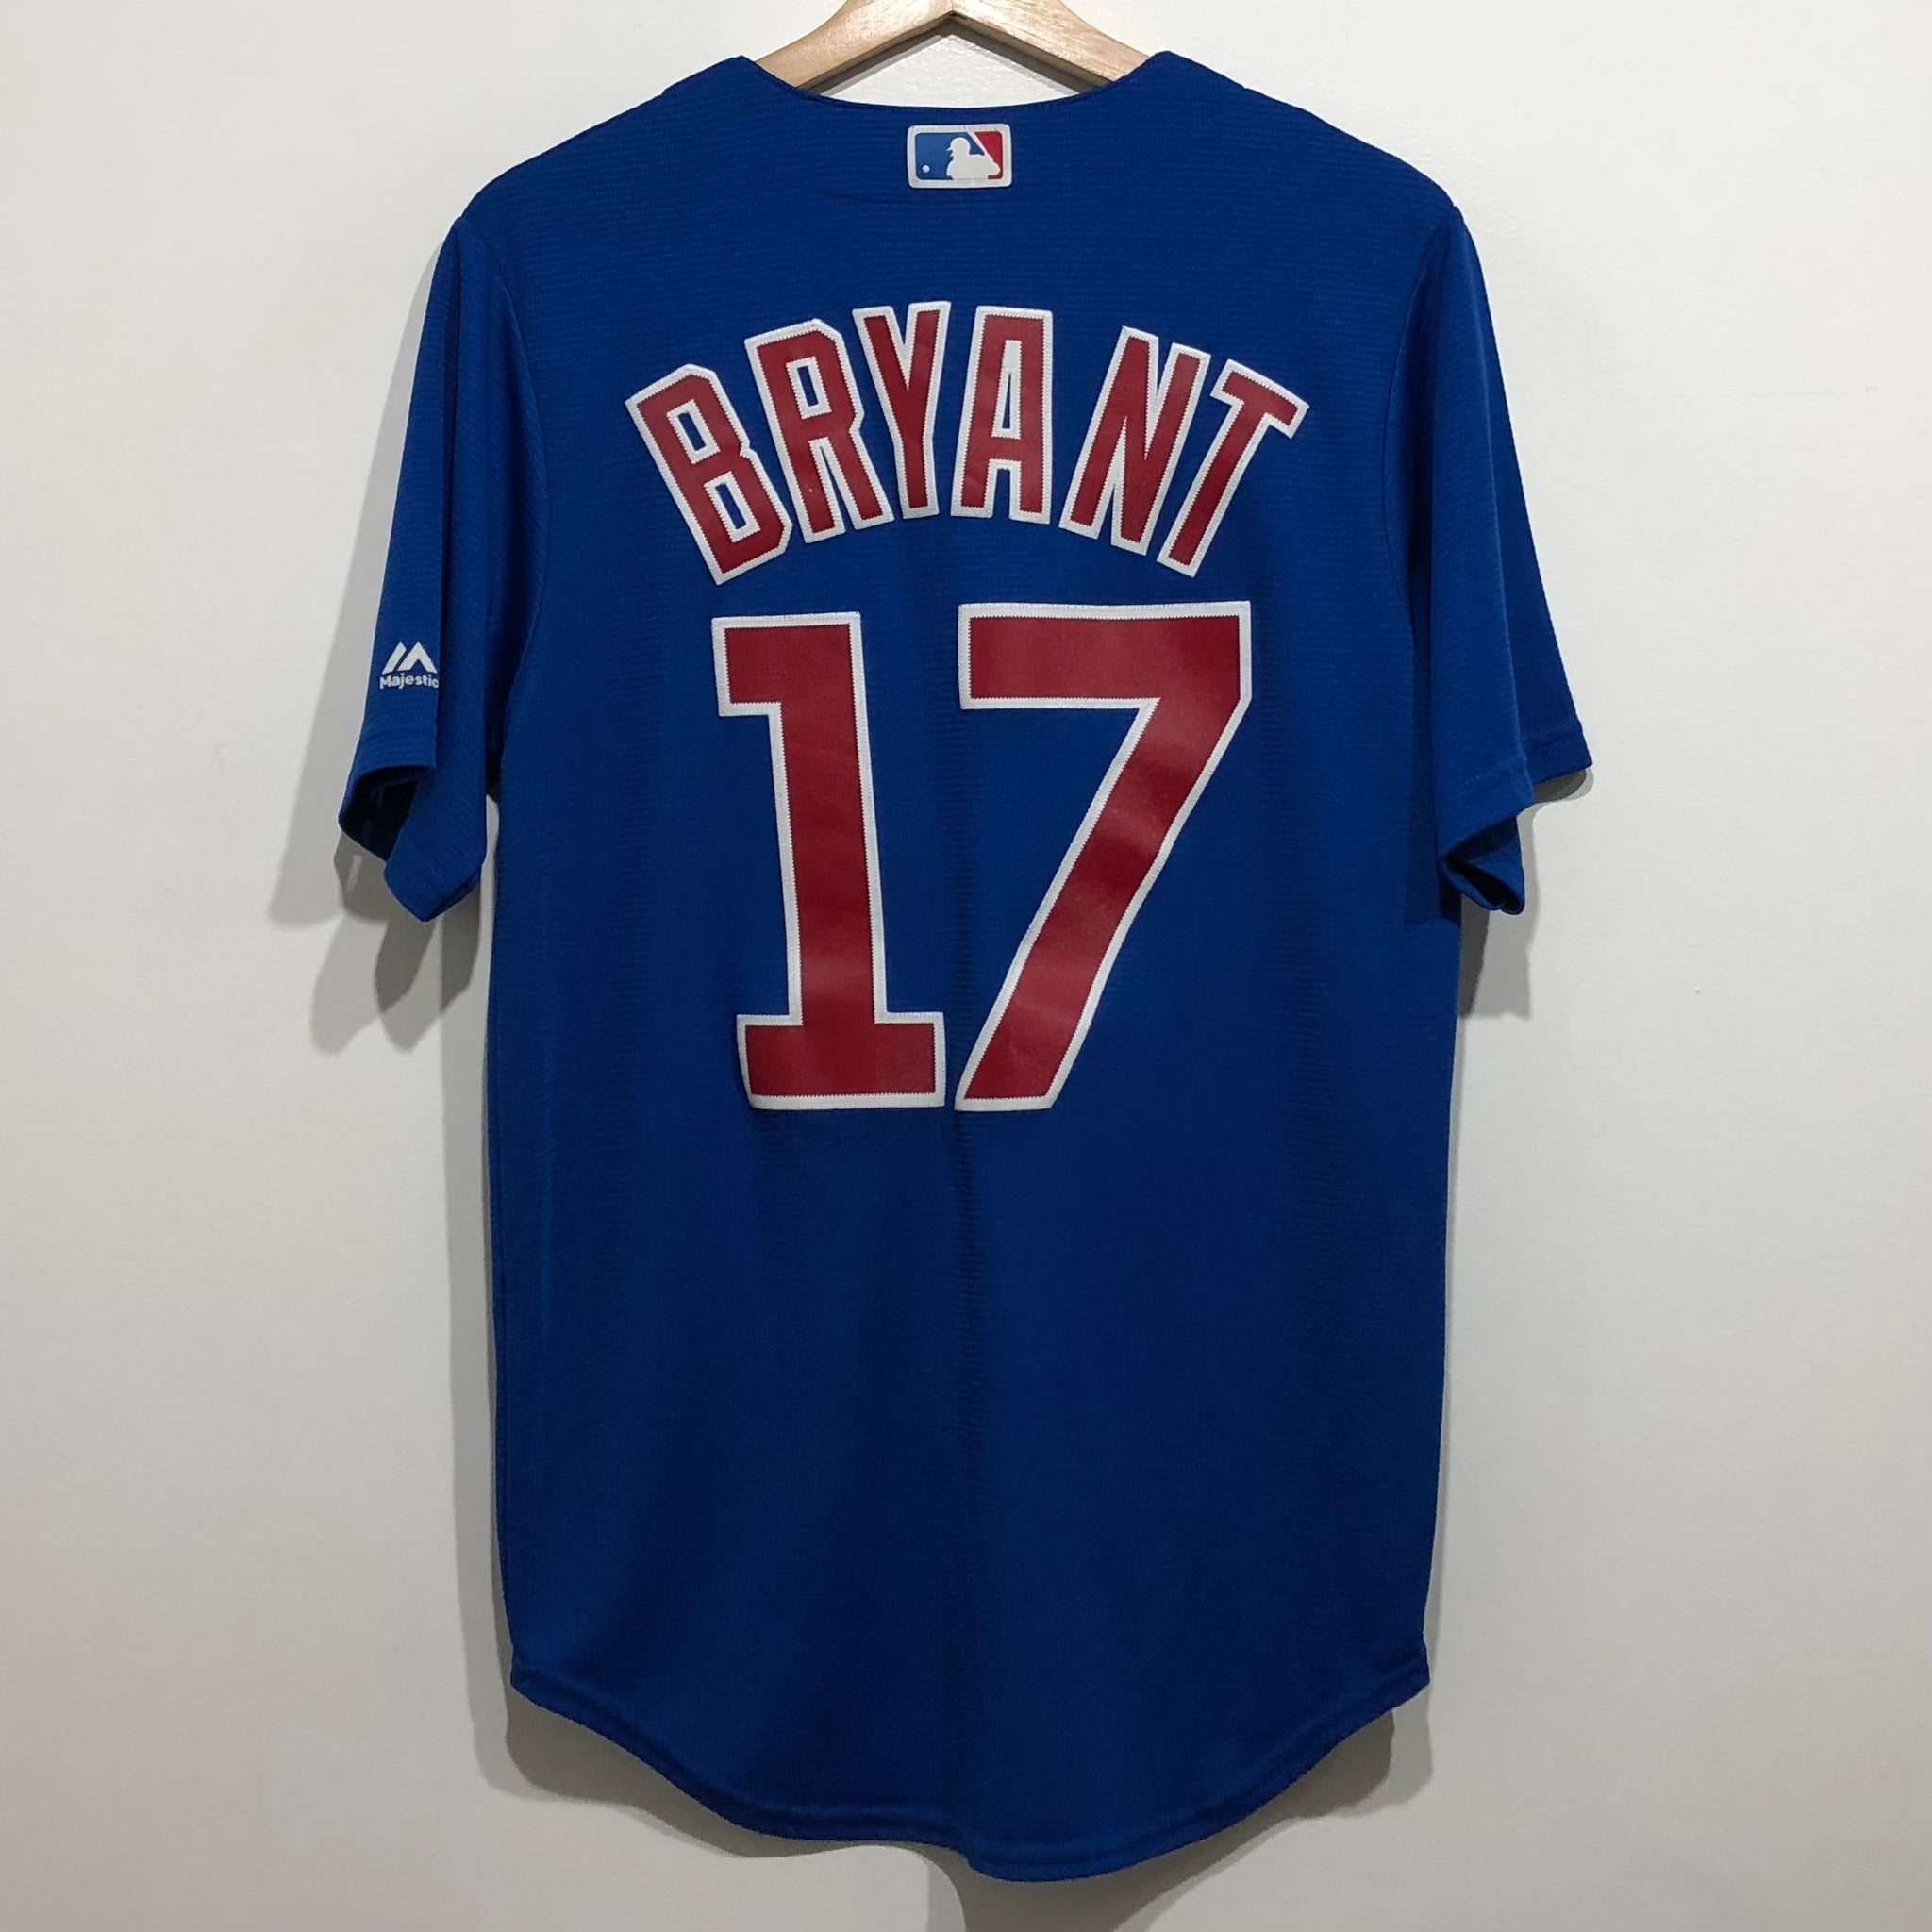 Kris Bryant Chicago Cubs Jersey Tee